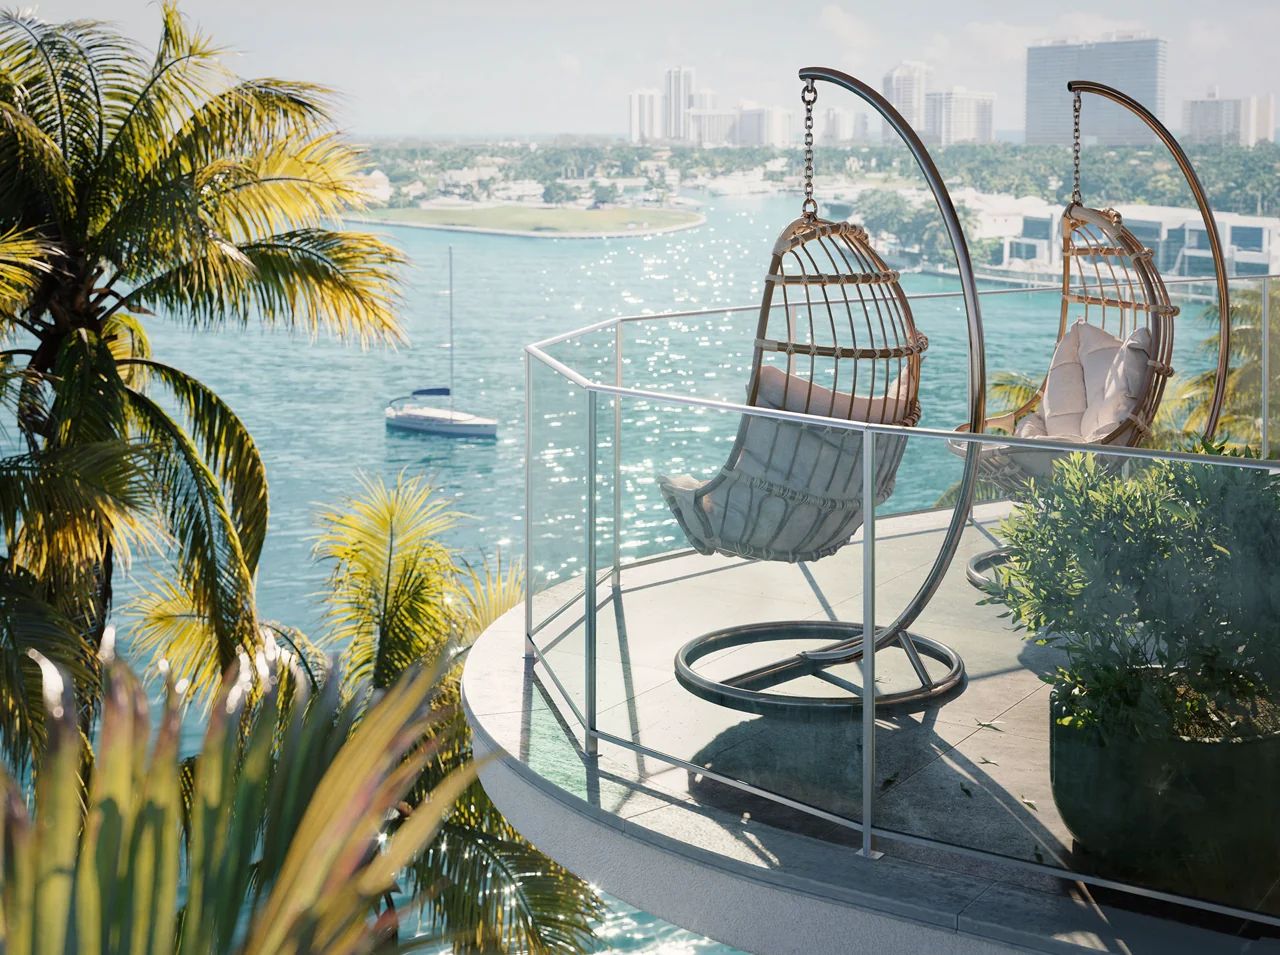 Spacious Balcony at Onda Residences with Luxurious Outdoor Furniture and a Stunning View of Bay Harbor Islands Waterfront